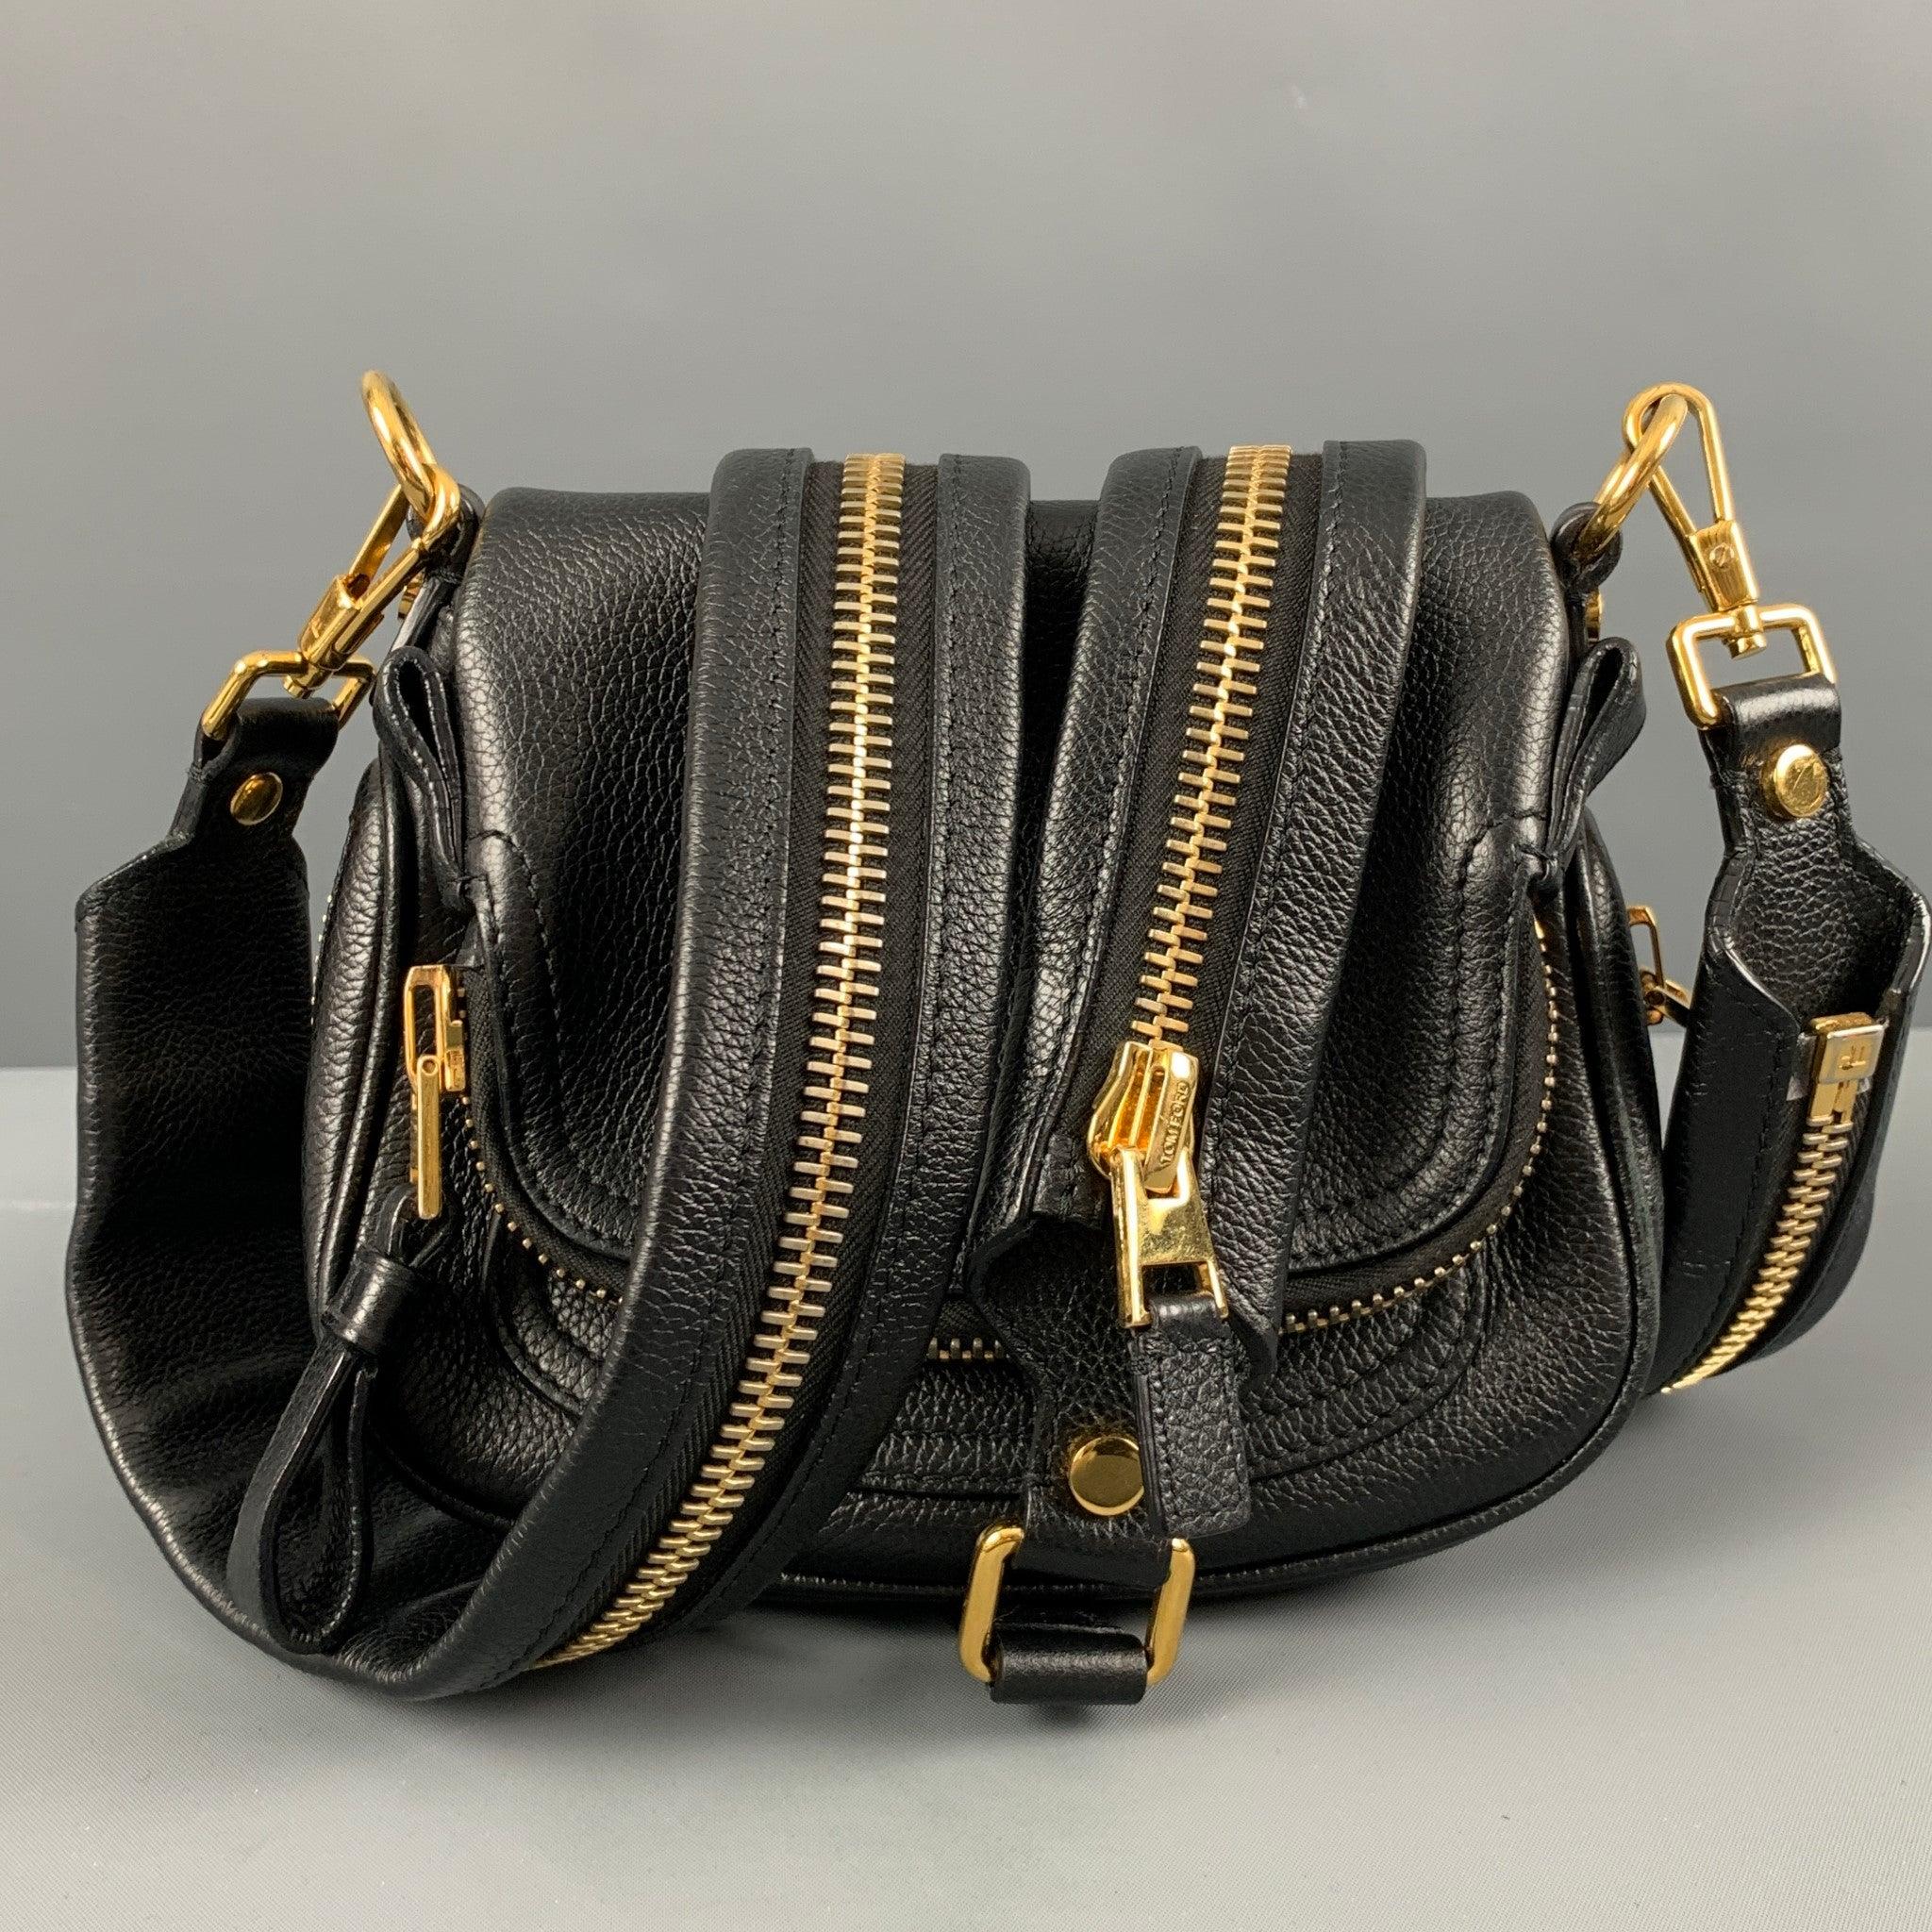 TOM FORD JENNIFER double paunch handbag comes in a black leather featuring a shoulder strap, gold tone hardware, inner pocket, and a zipper closure. Made in Italy.Very Good Pre-Owned Condition. Minor signs of wear. 

Marked:   L0313t-010-AE